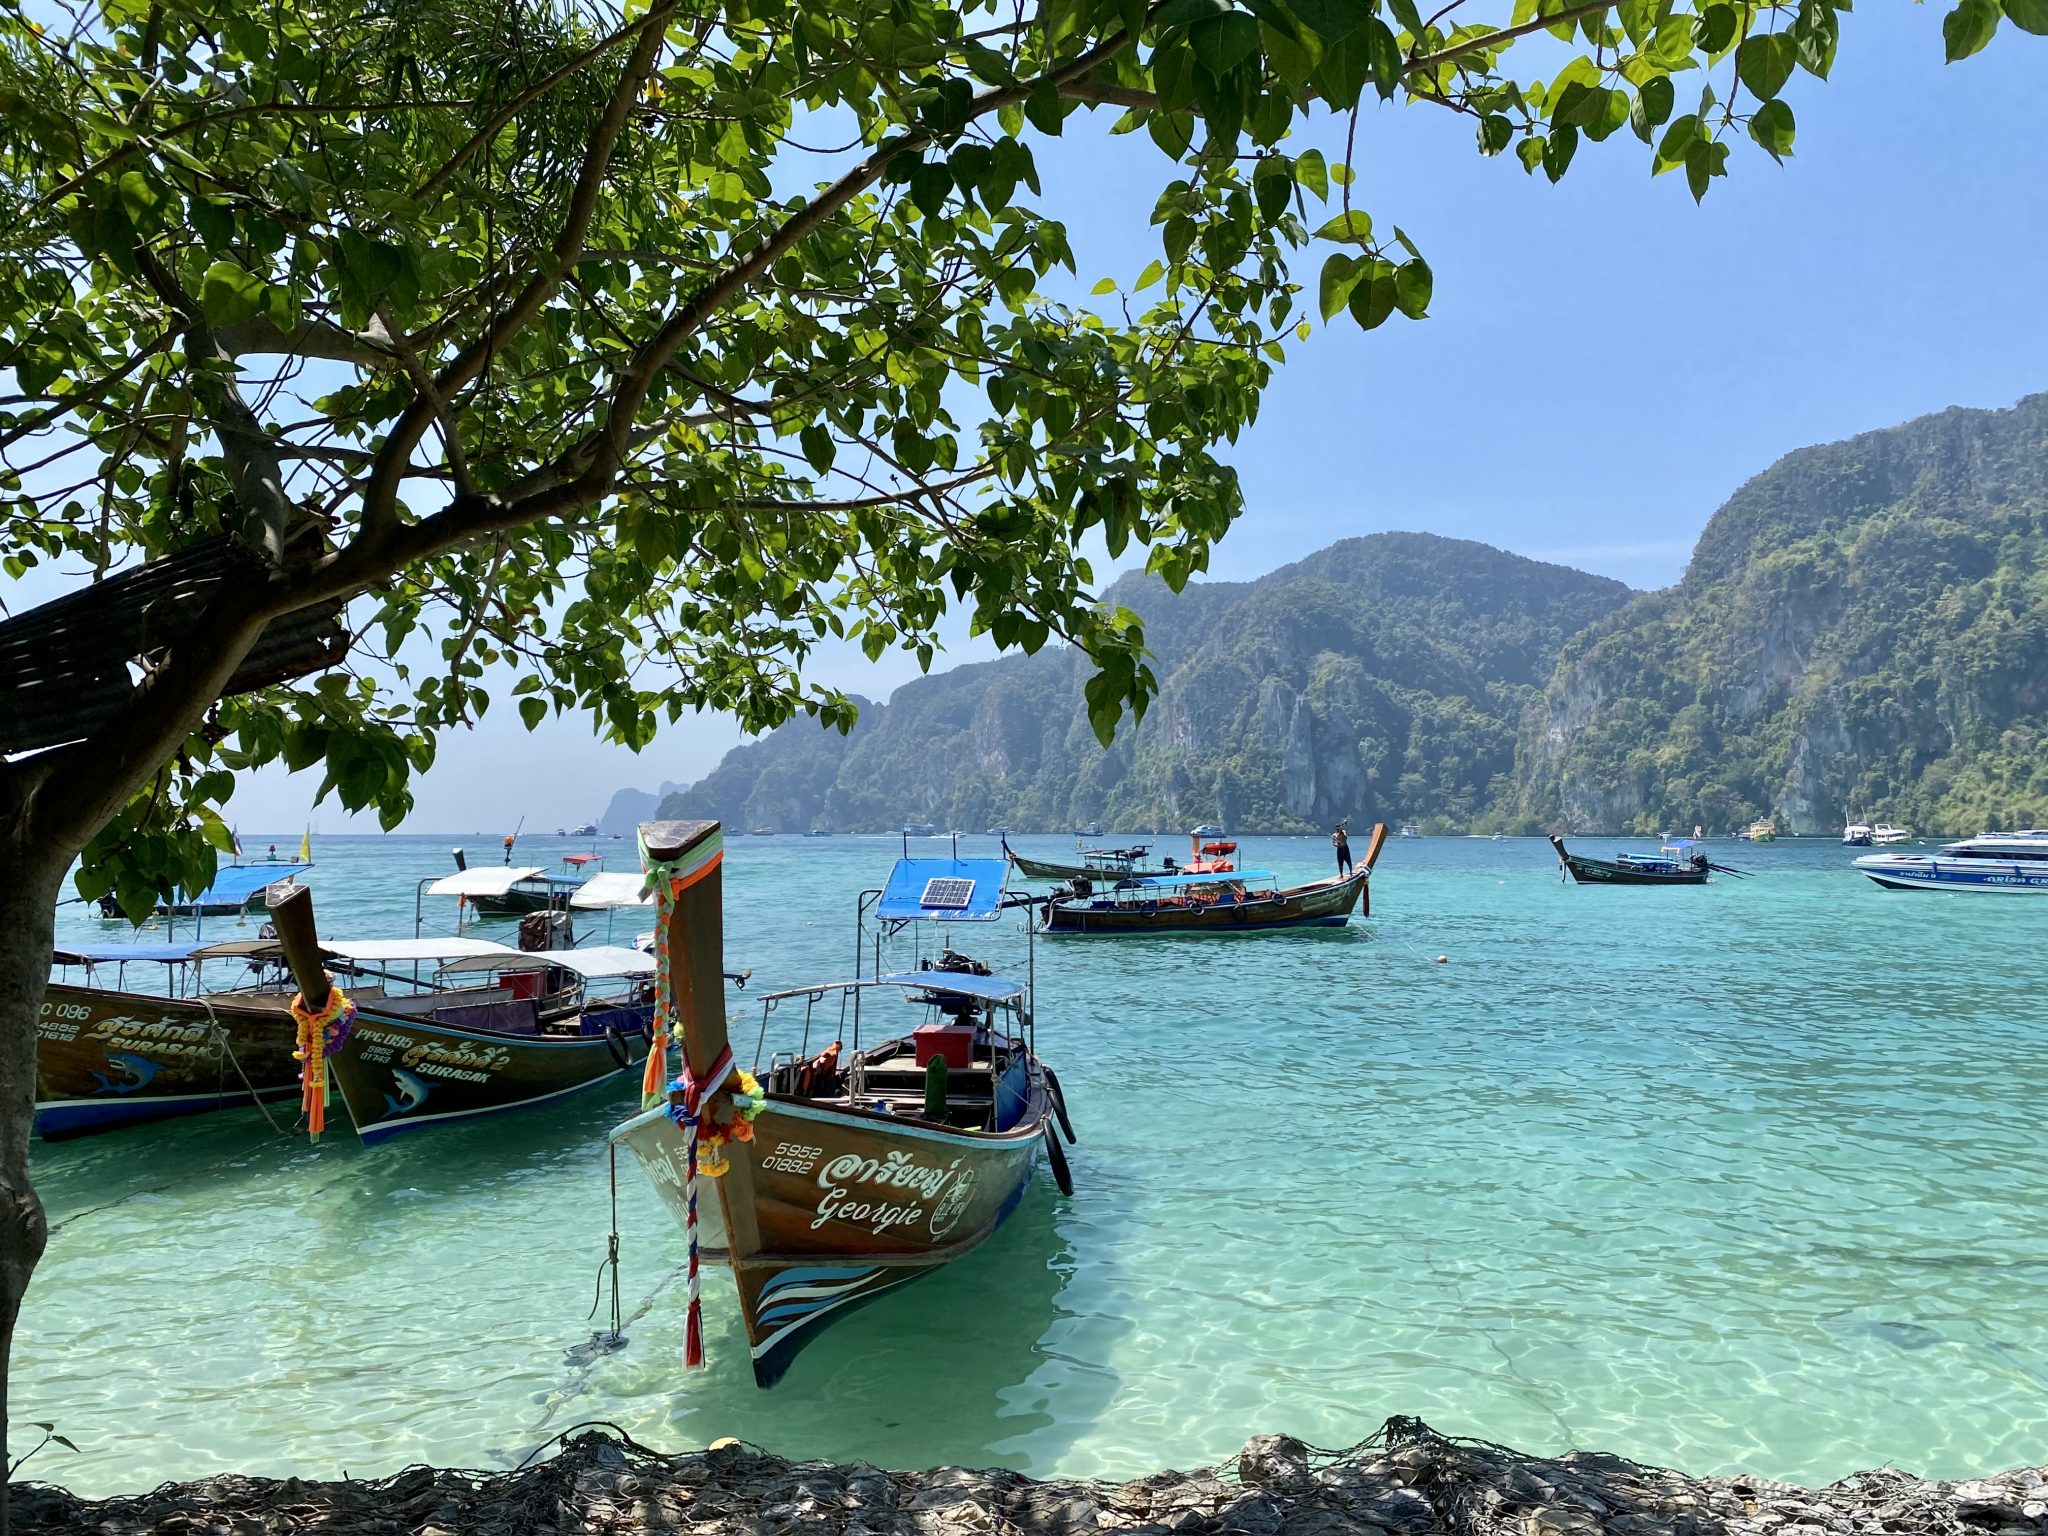 Colorful long boats in Koh Phi Phi